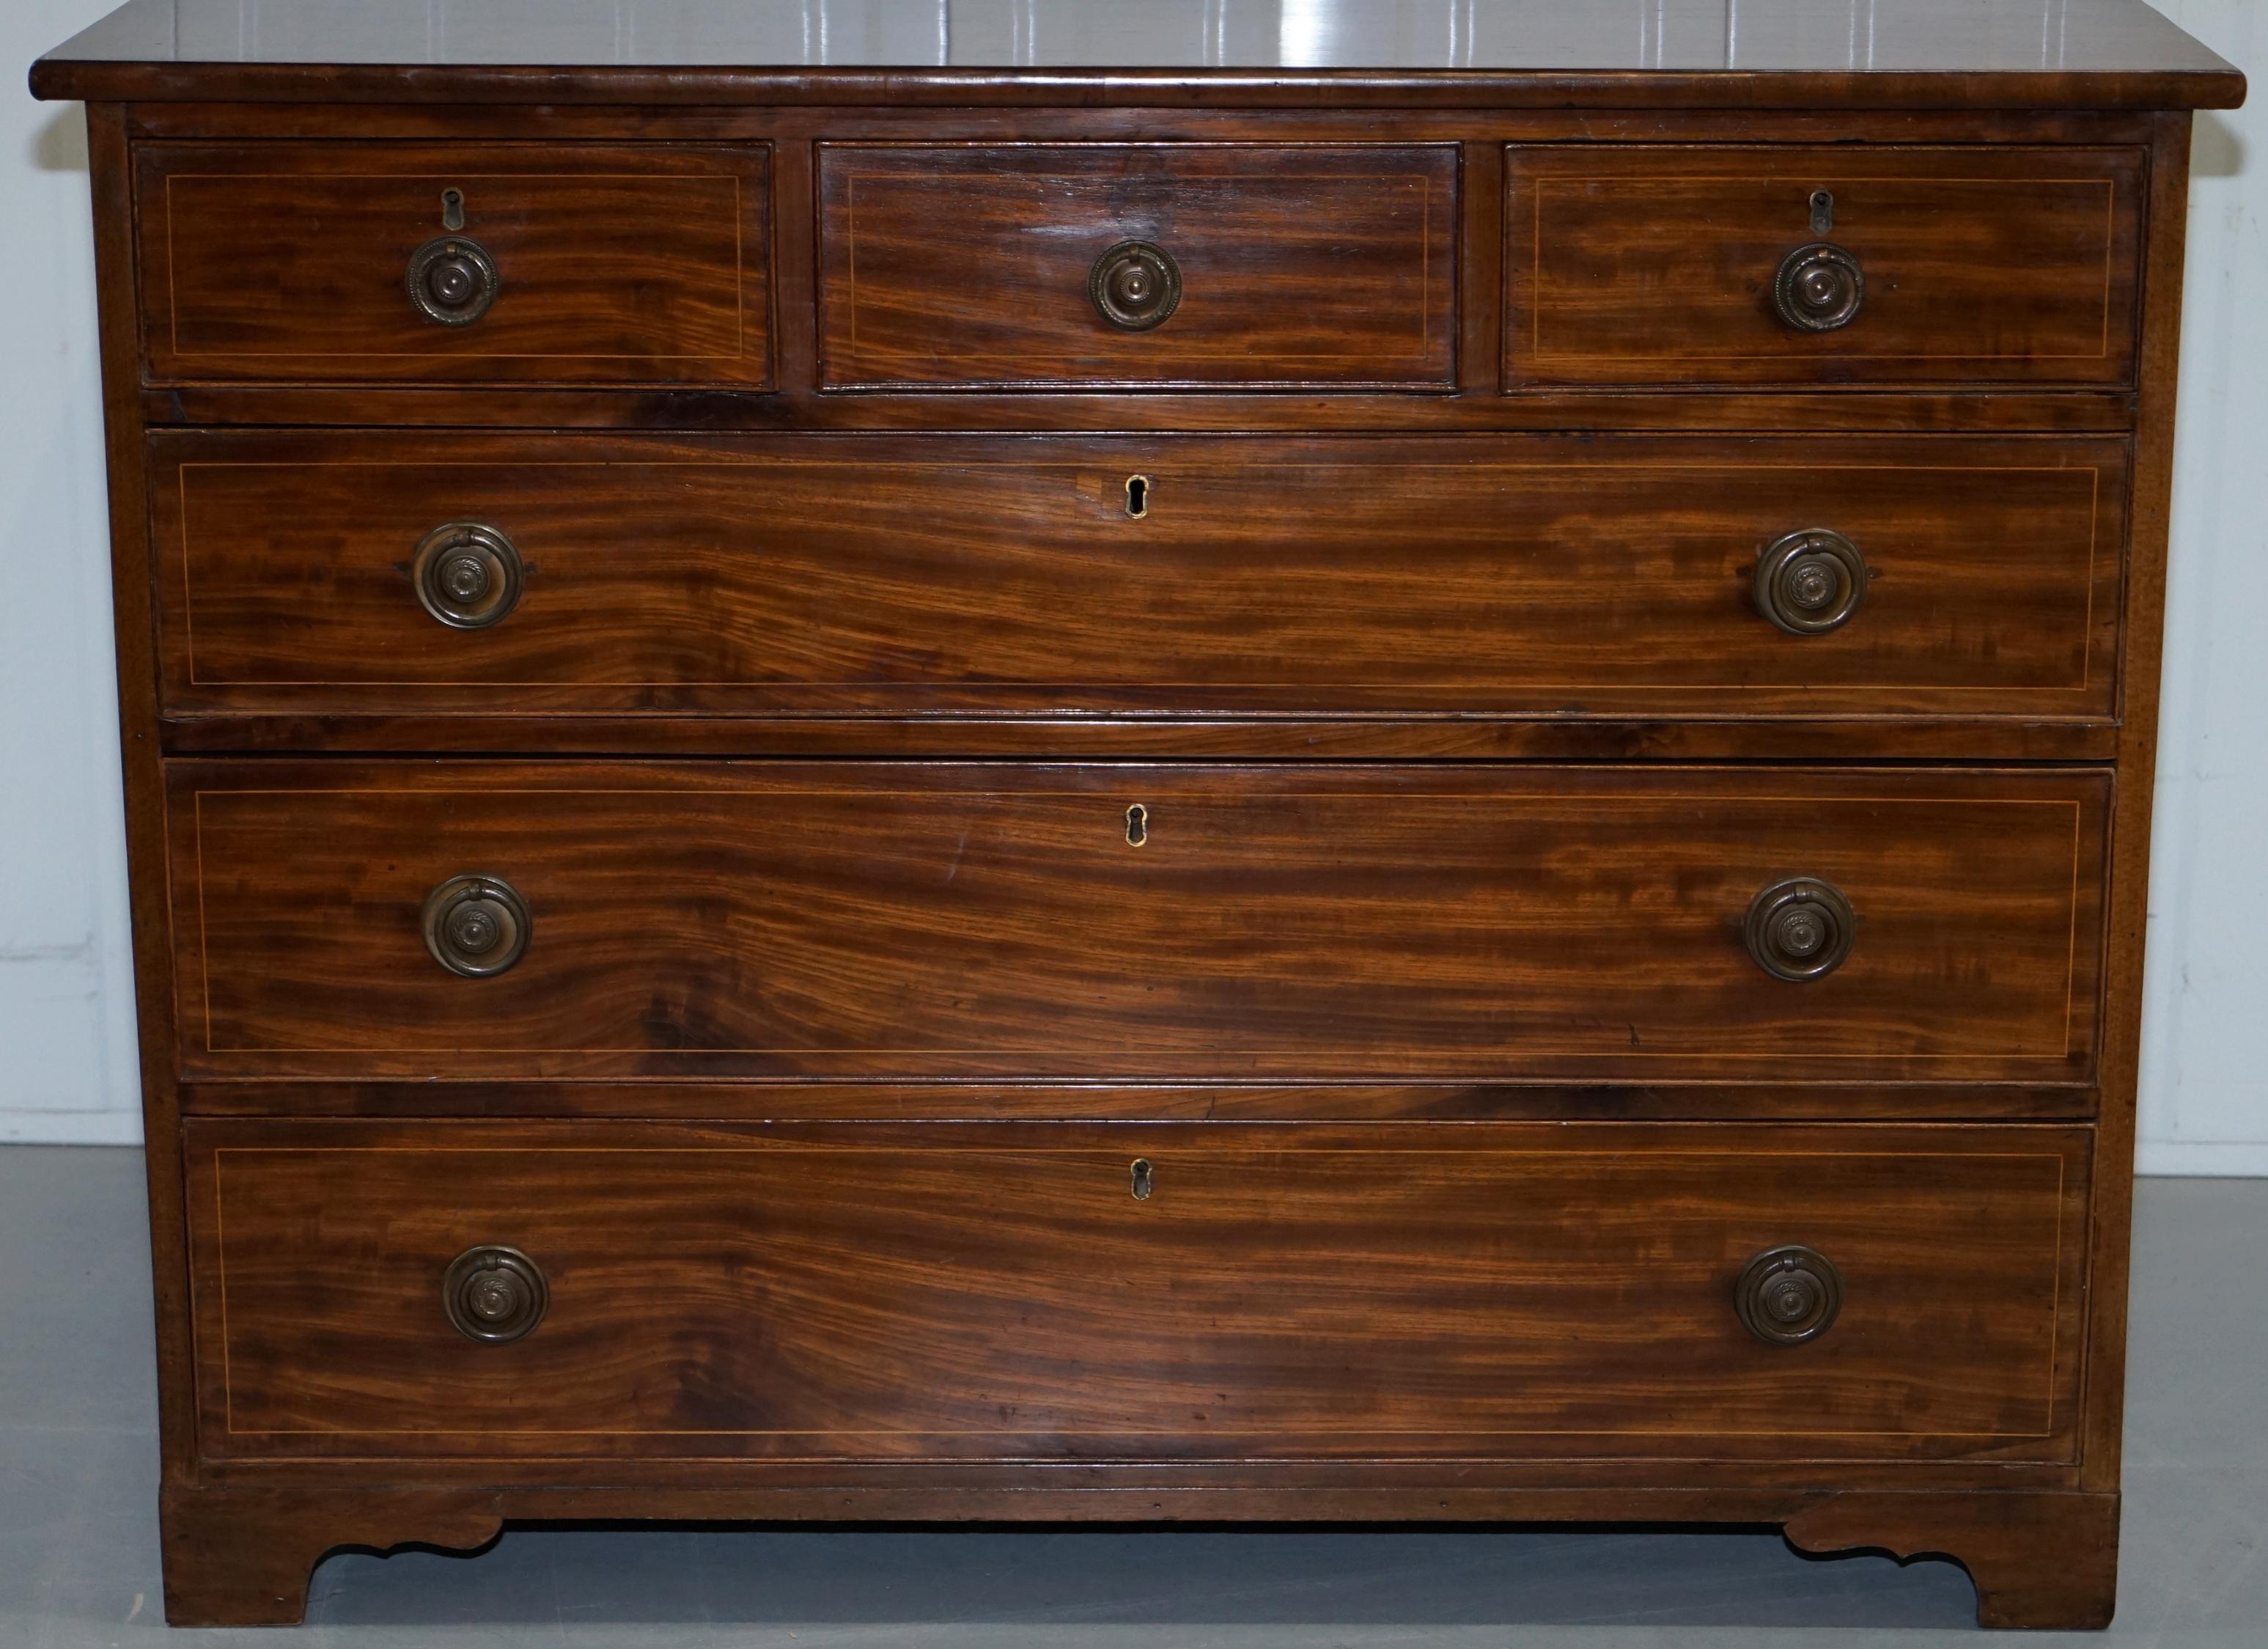 Lovely circa 1800 Georgian Hardwood Chest of Drawers Three over Three Formation 2